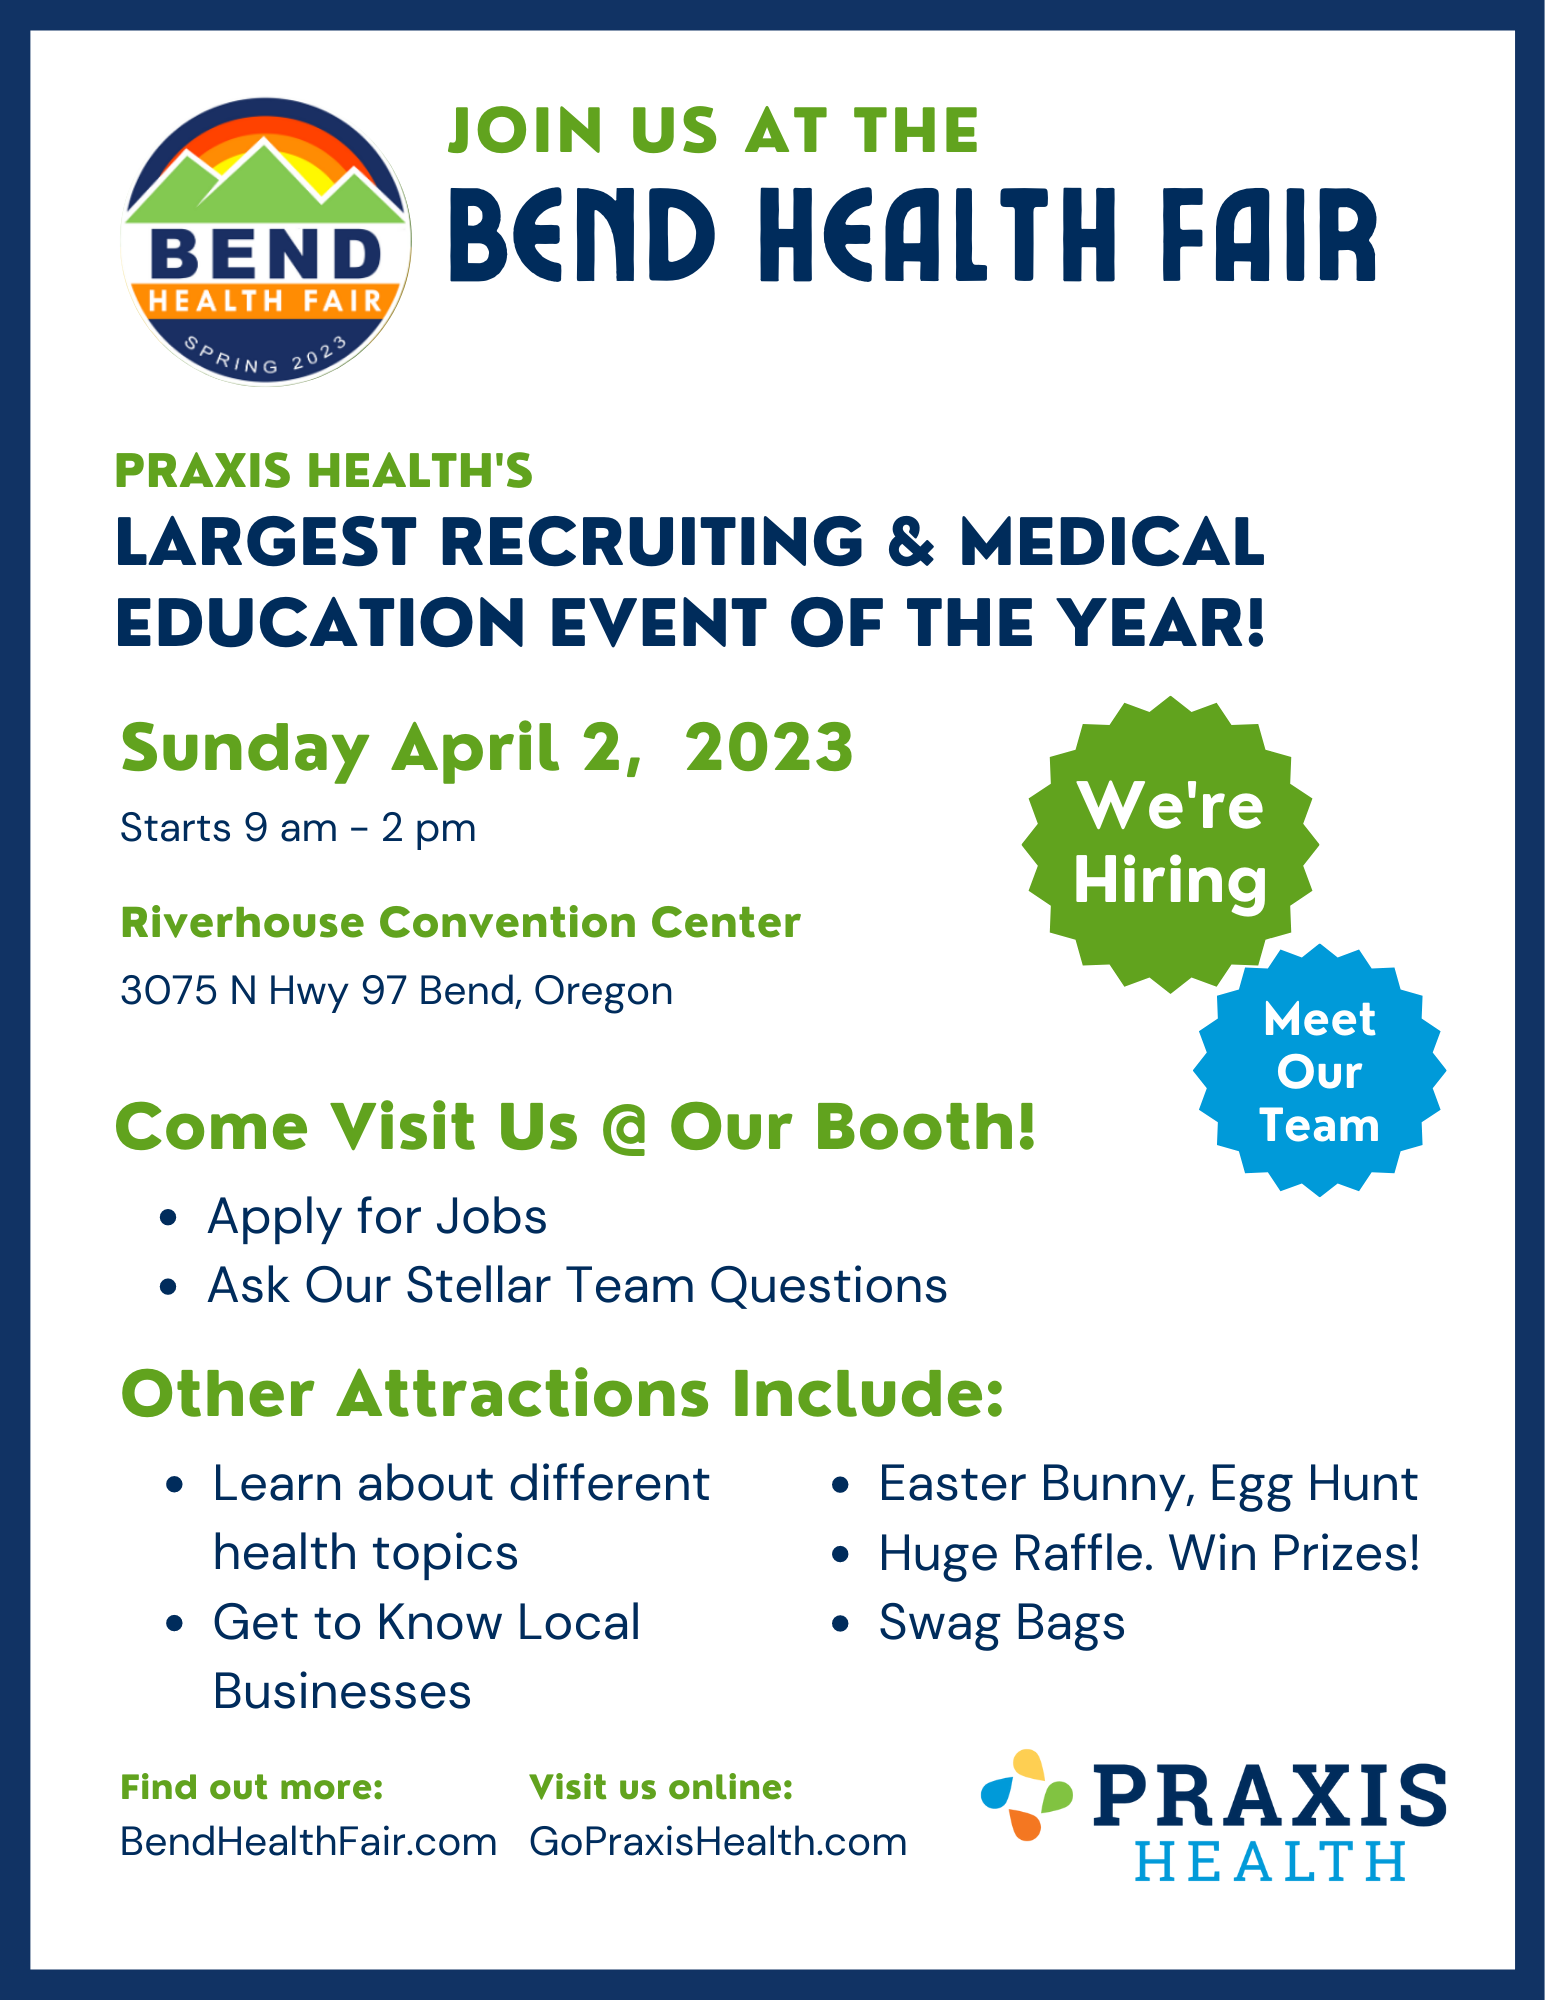 Praxis Bend Health Fair Recruiting Poster 3-22-23 | Urology Specialists of Oregon